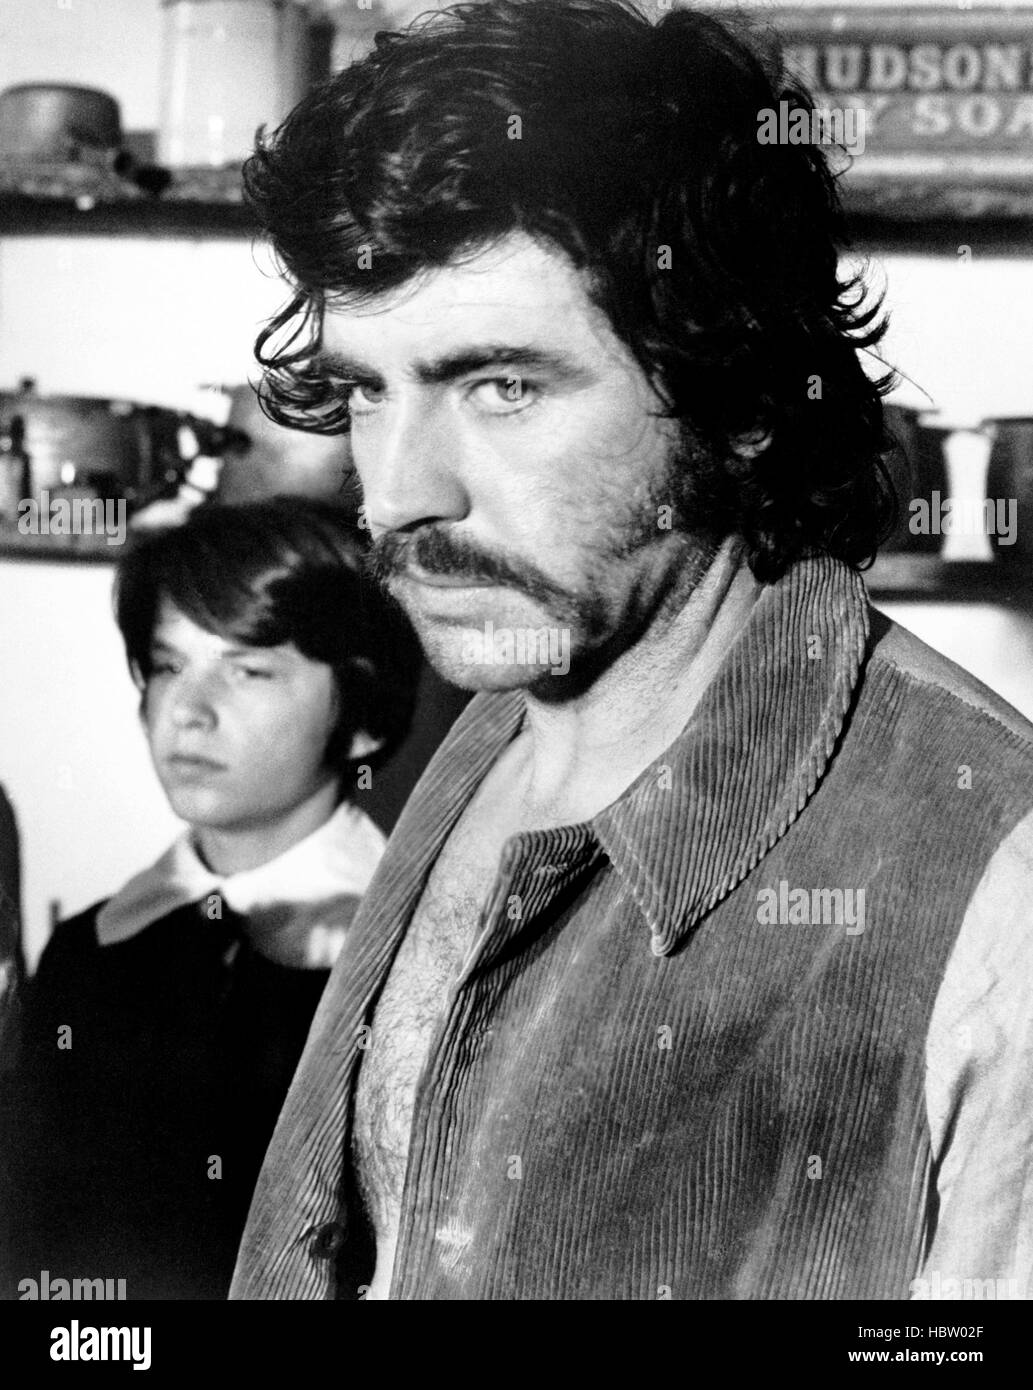 THE GO-BETWEEN, from left, Dominic Guard, Alan Bates, 1970 Stock Photo -  Alamy